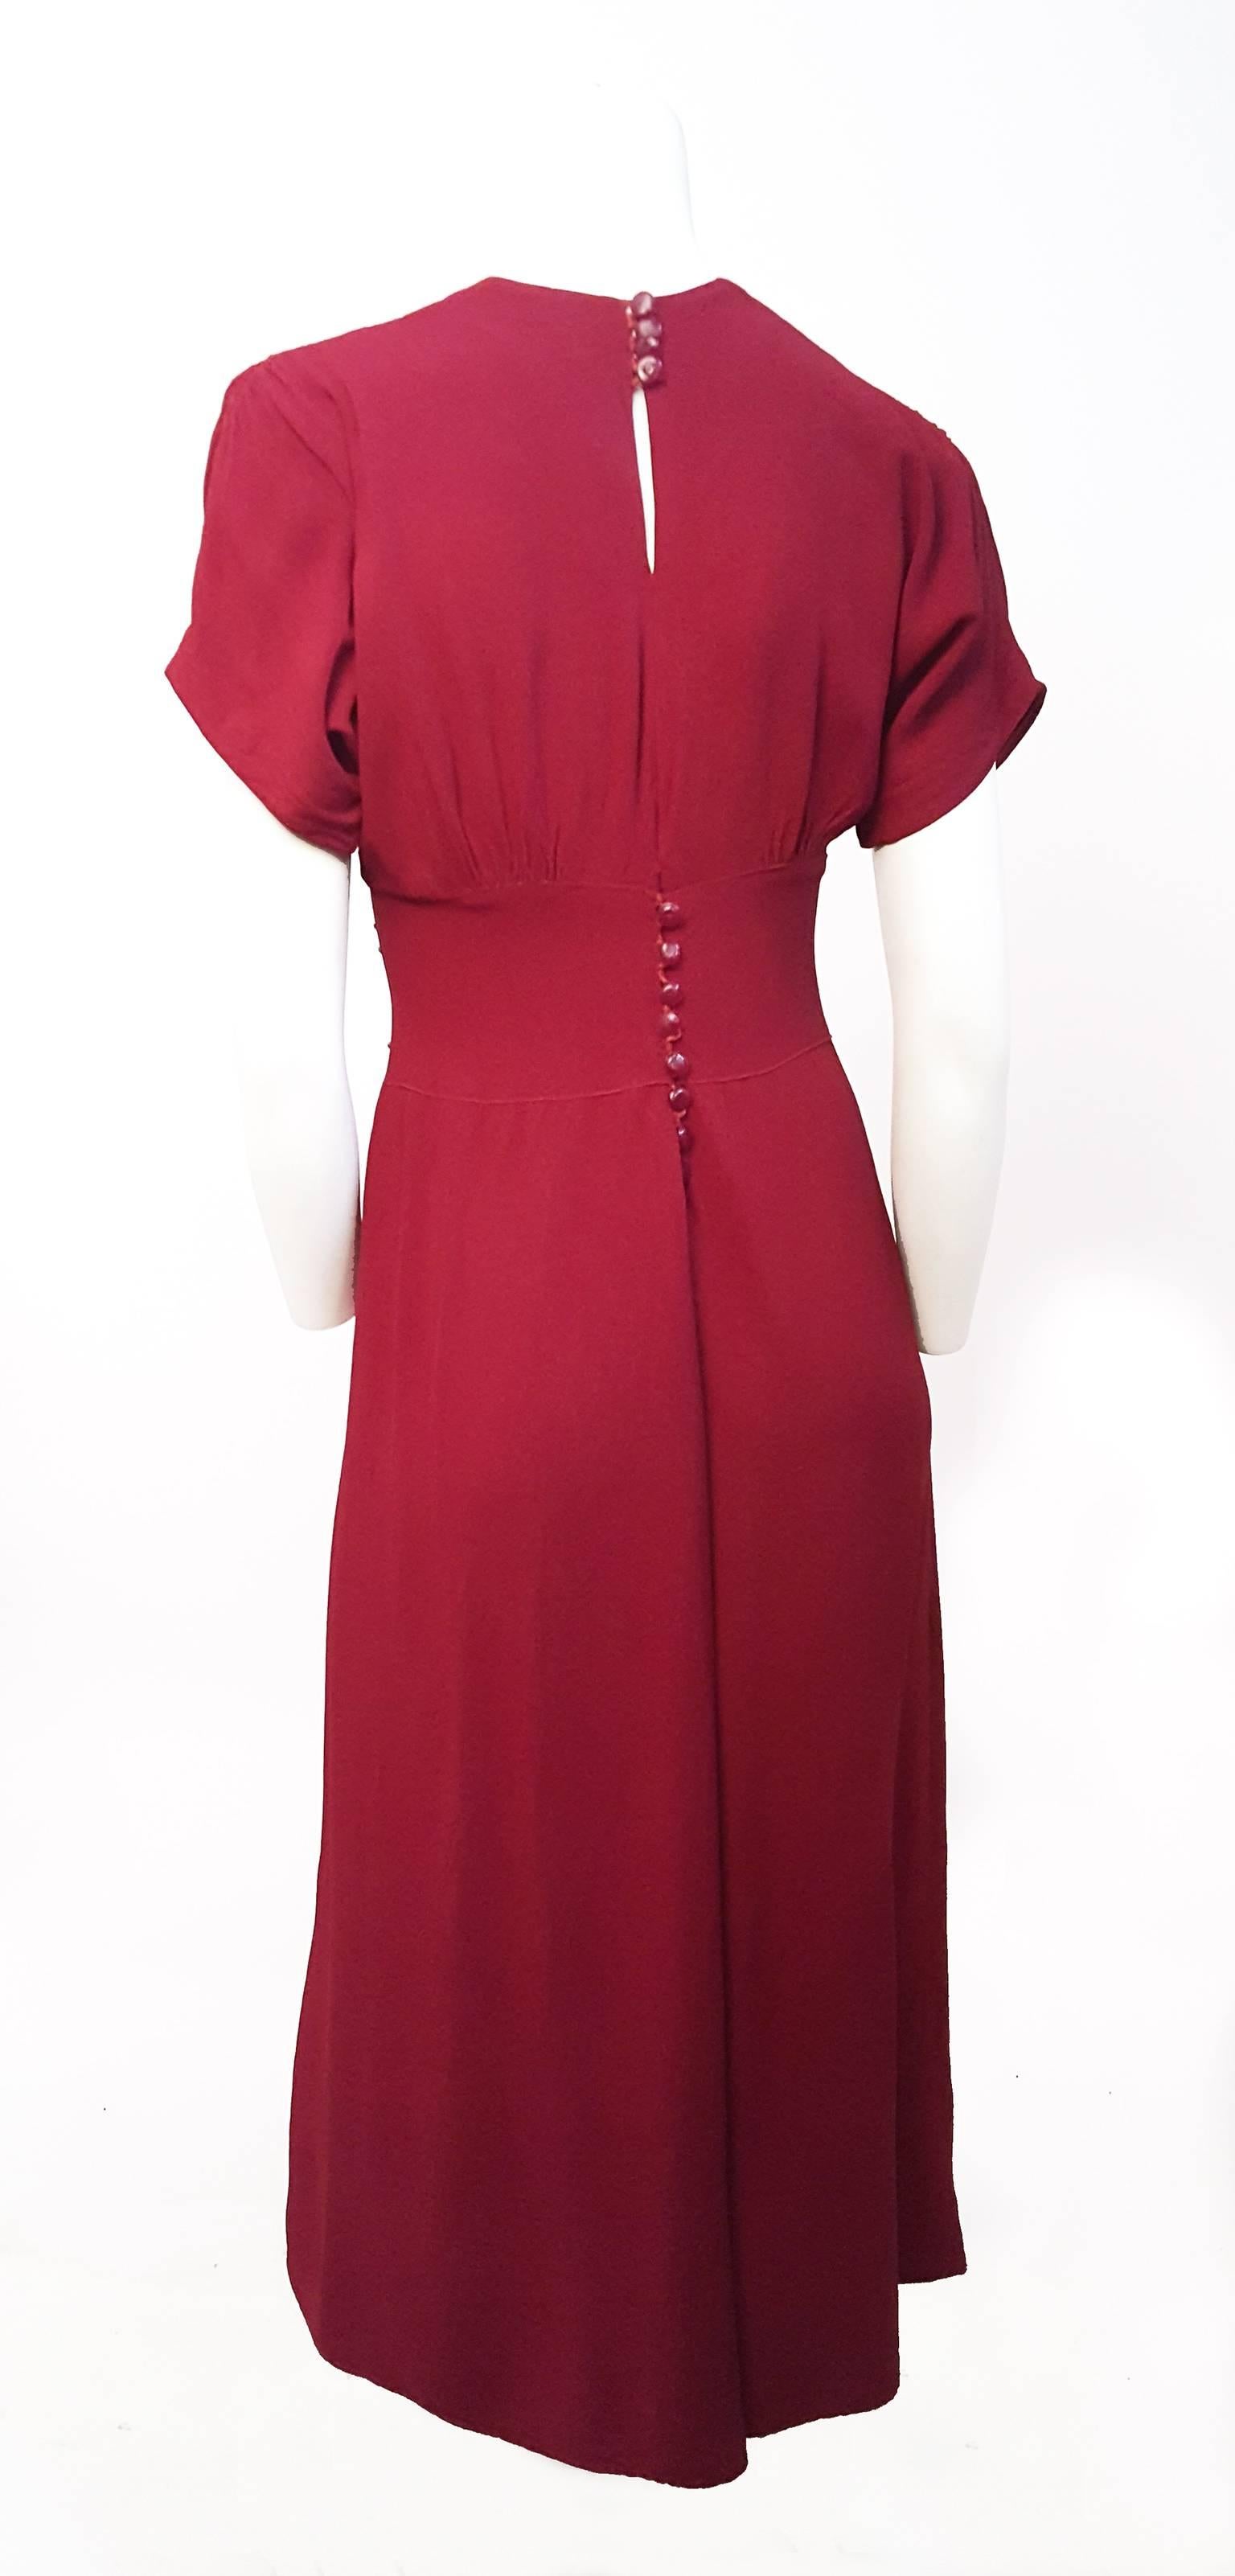 30s/40s Red Knit Jersey Dress w/ Bead Detail. Smocking detail on bodice and sleeves. Back button closure.